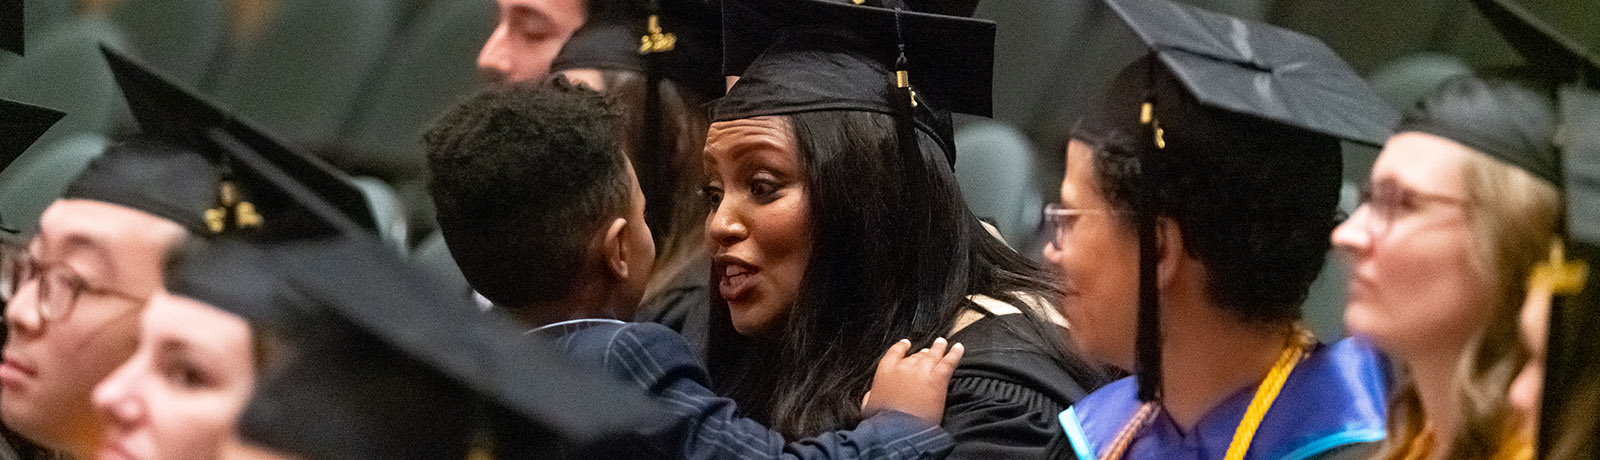 A graduate holds a small child and speaks to him while seating with other graduates during fall convocation